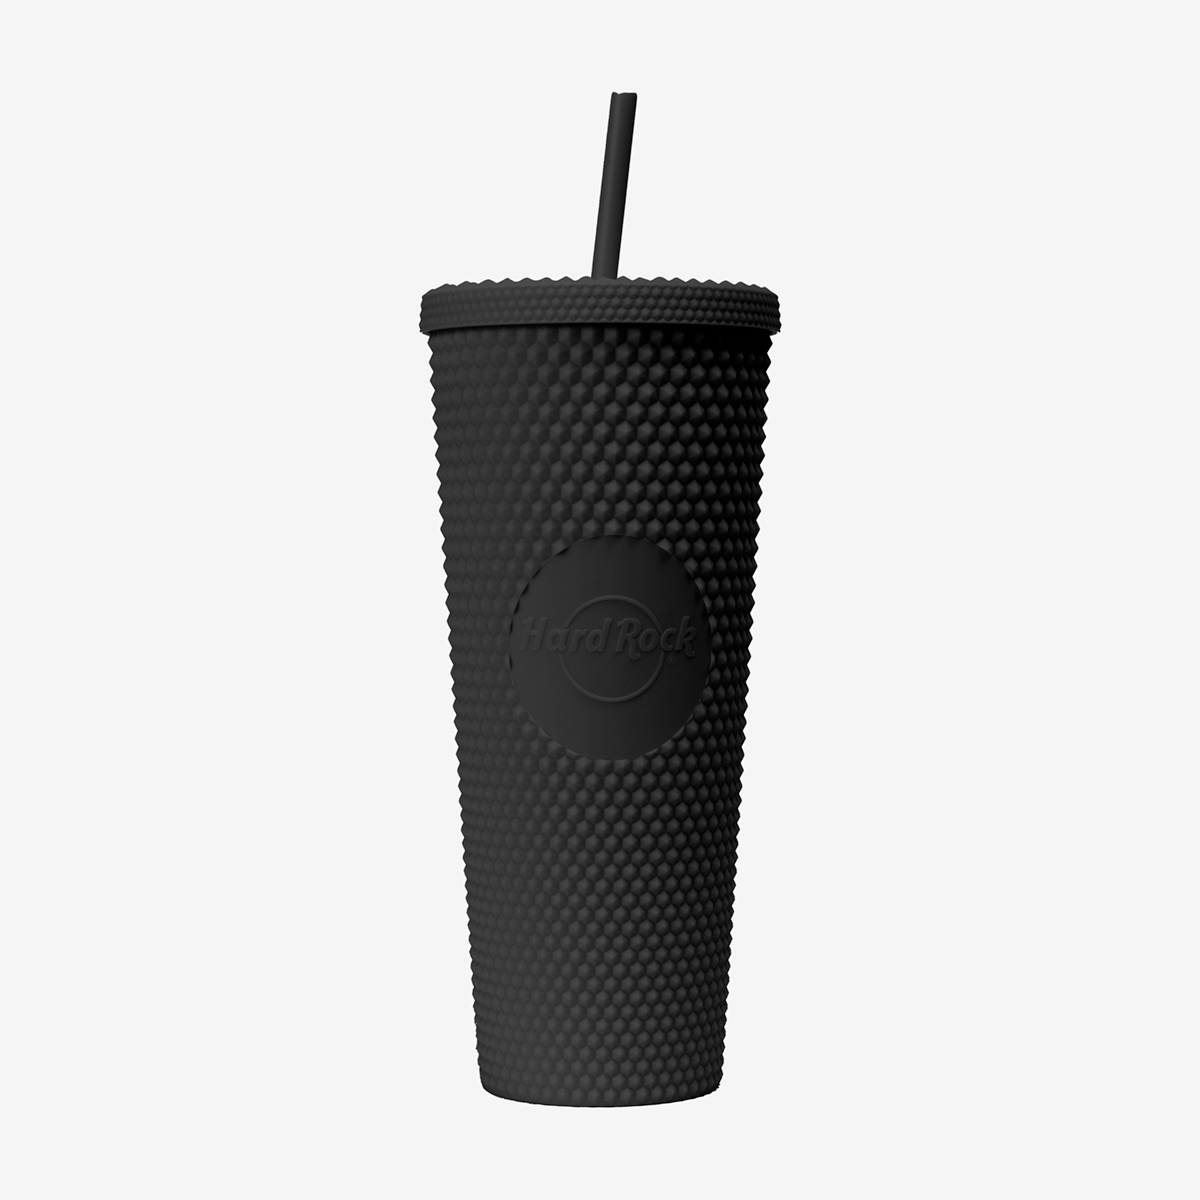 Hard Rock Pop of Color Tumbler with Straw in Black 24oz image number 3